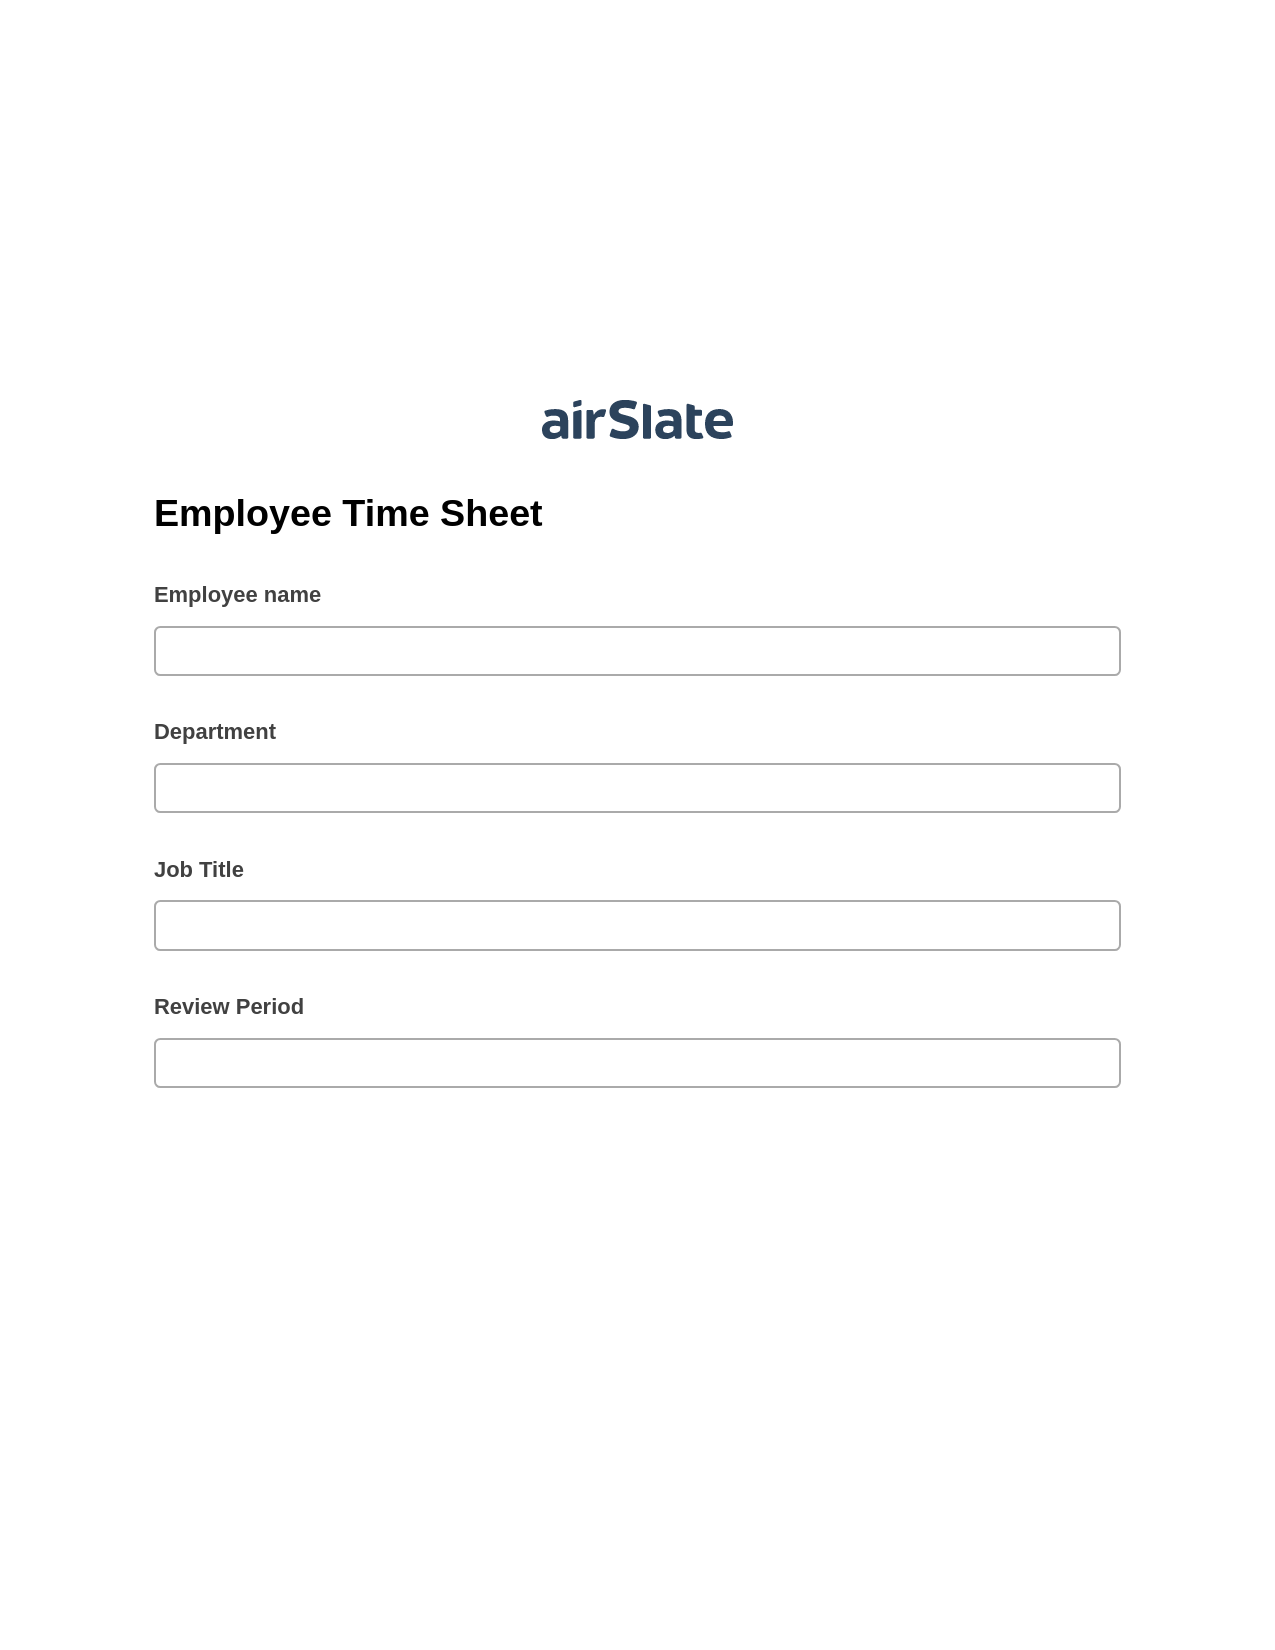 Employee Time Sheet Pre-fill Dropdowns from Airtable, Add Tags to Slate Bot, Archive to Dropbox Bot